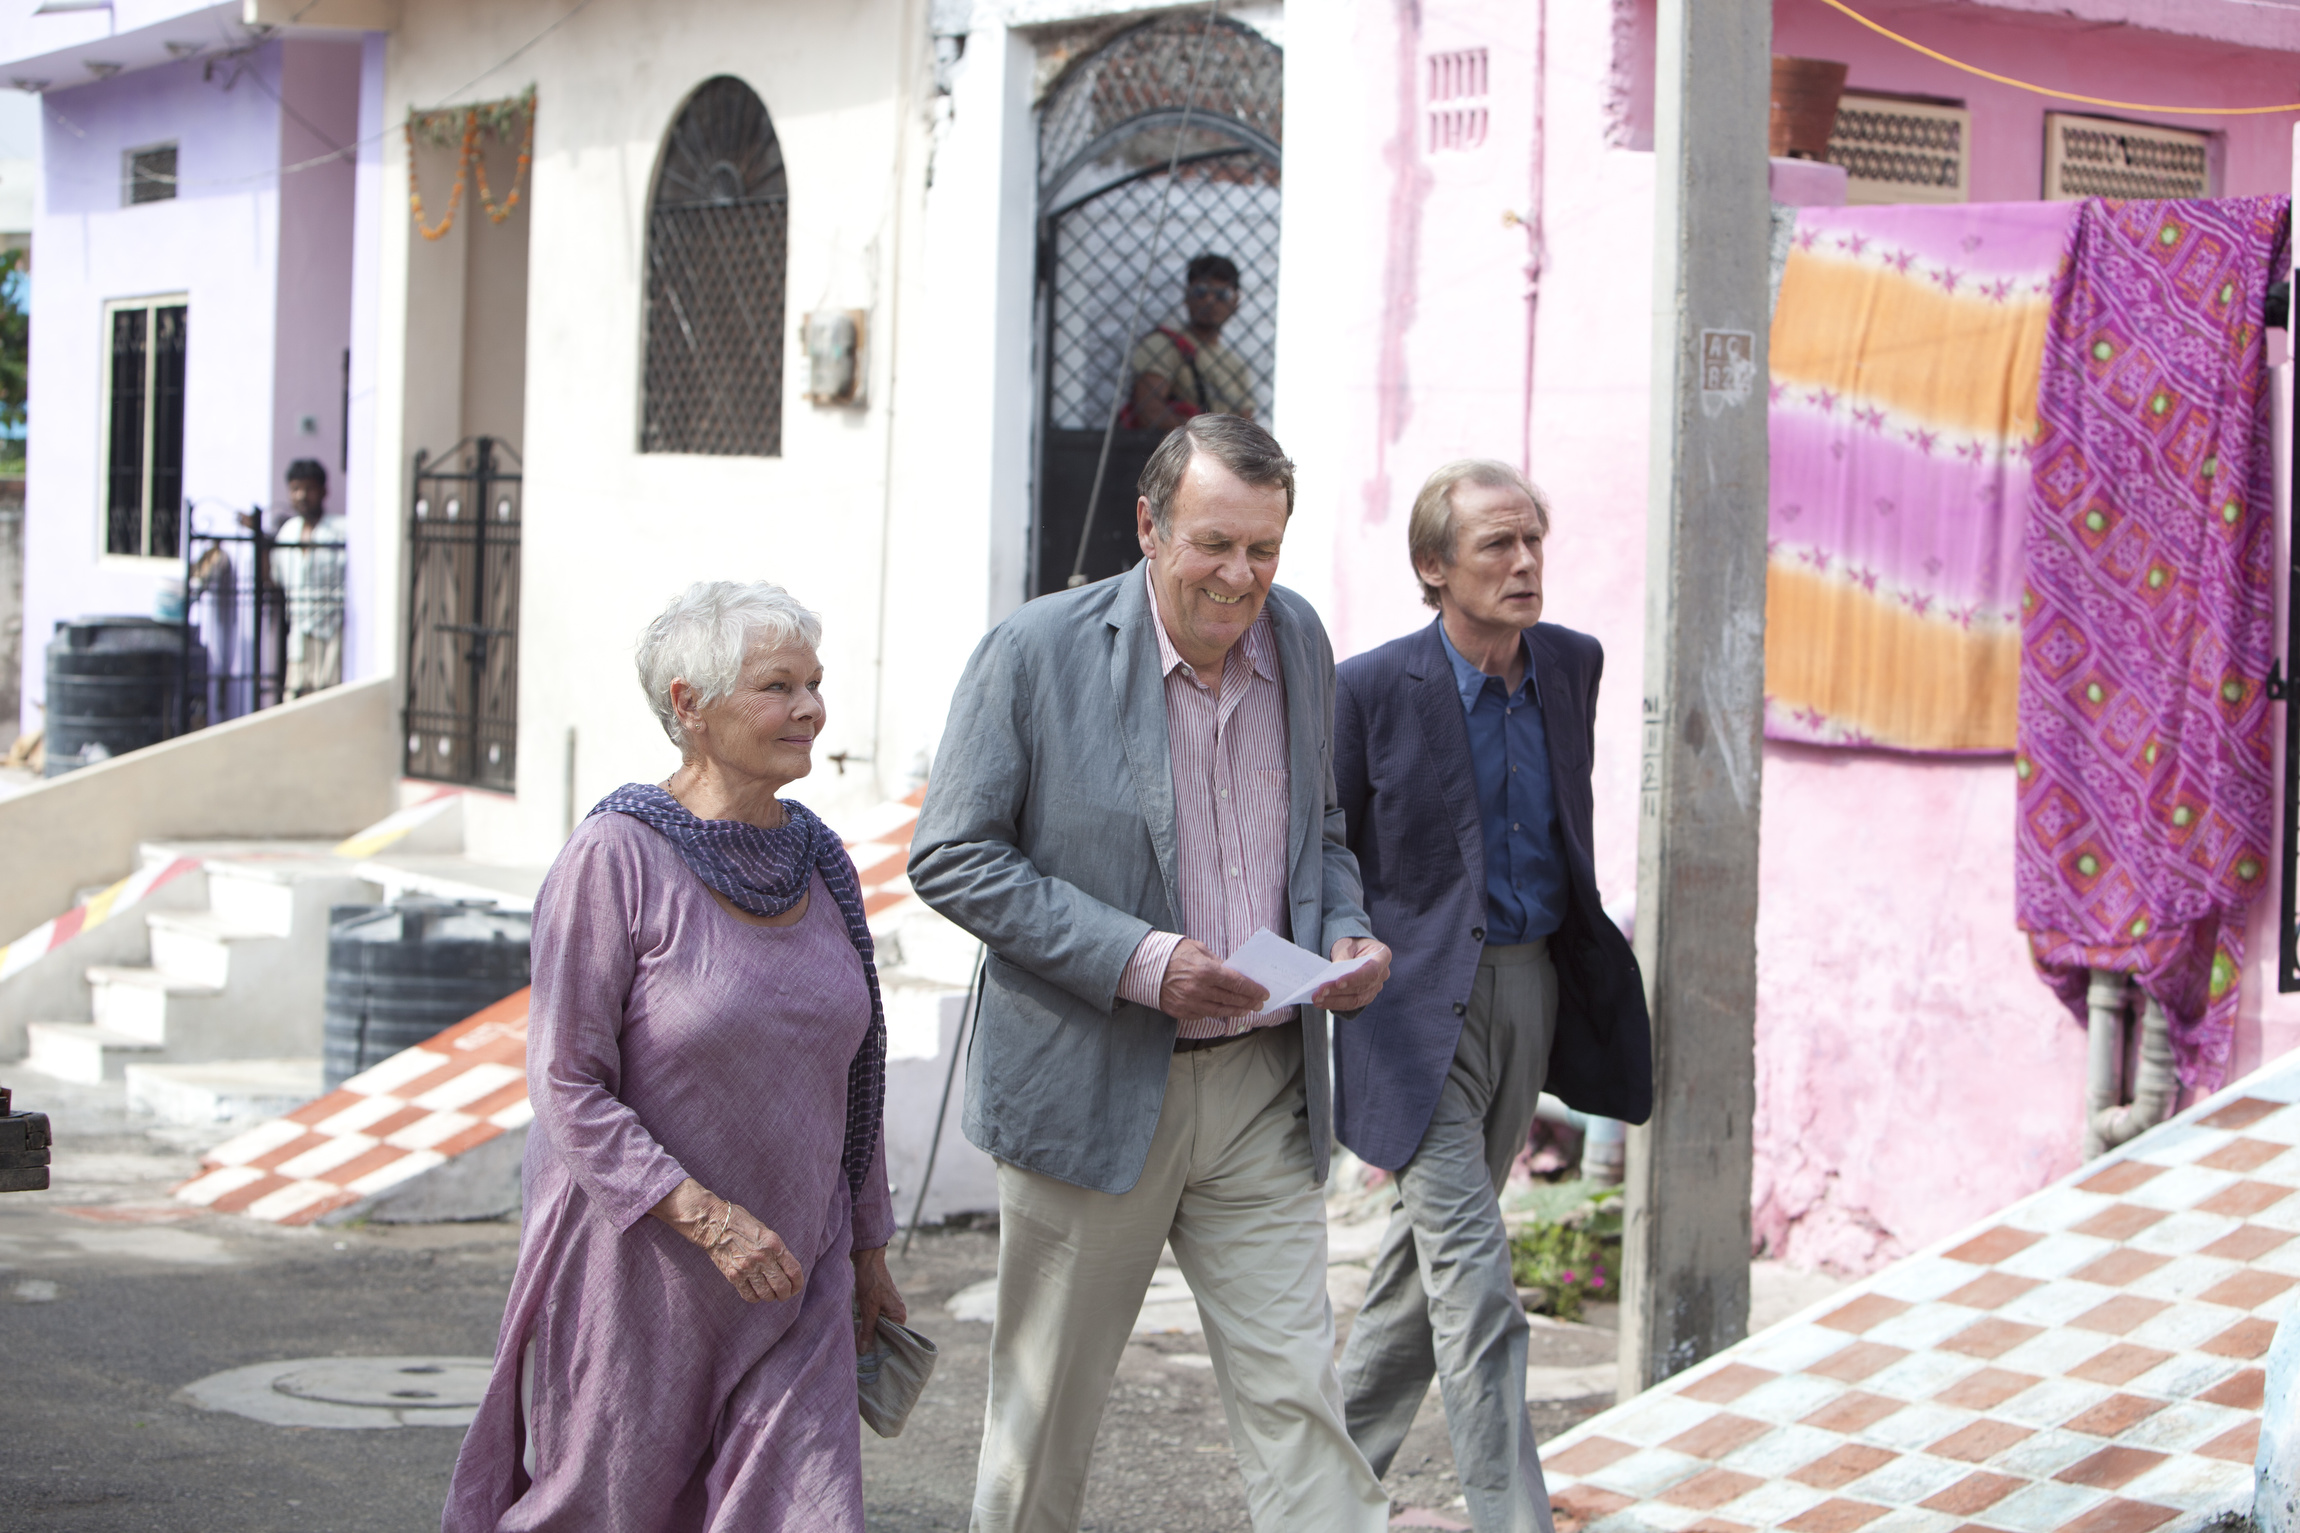 Judi Dench, Tom Wilkinson and Bill Nighy star in a scene from the movie "The Best Exotic Marigold Hotel." (CNS/Fox Searchlight) 